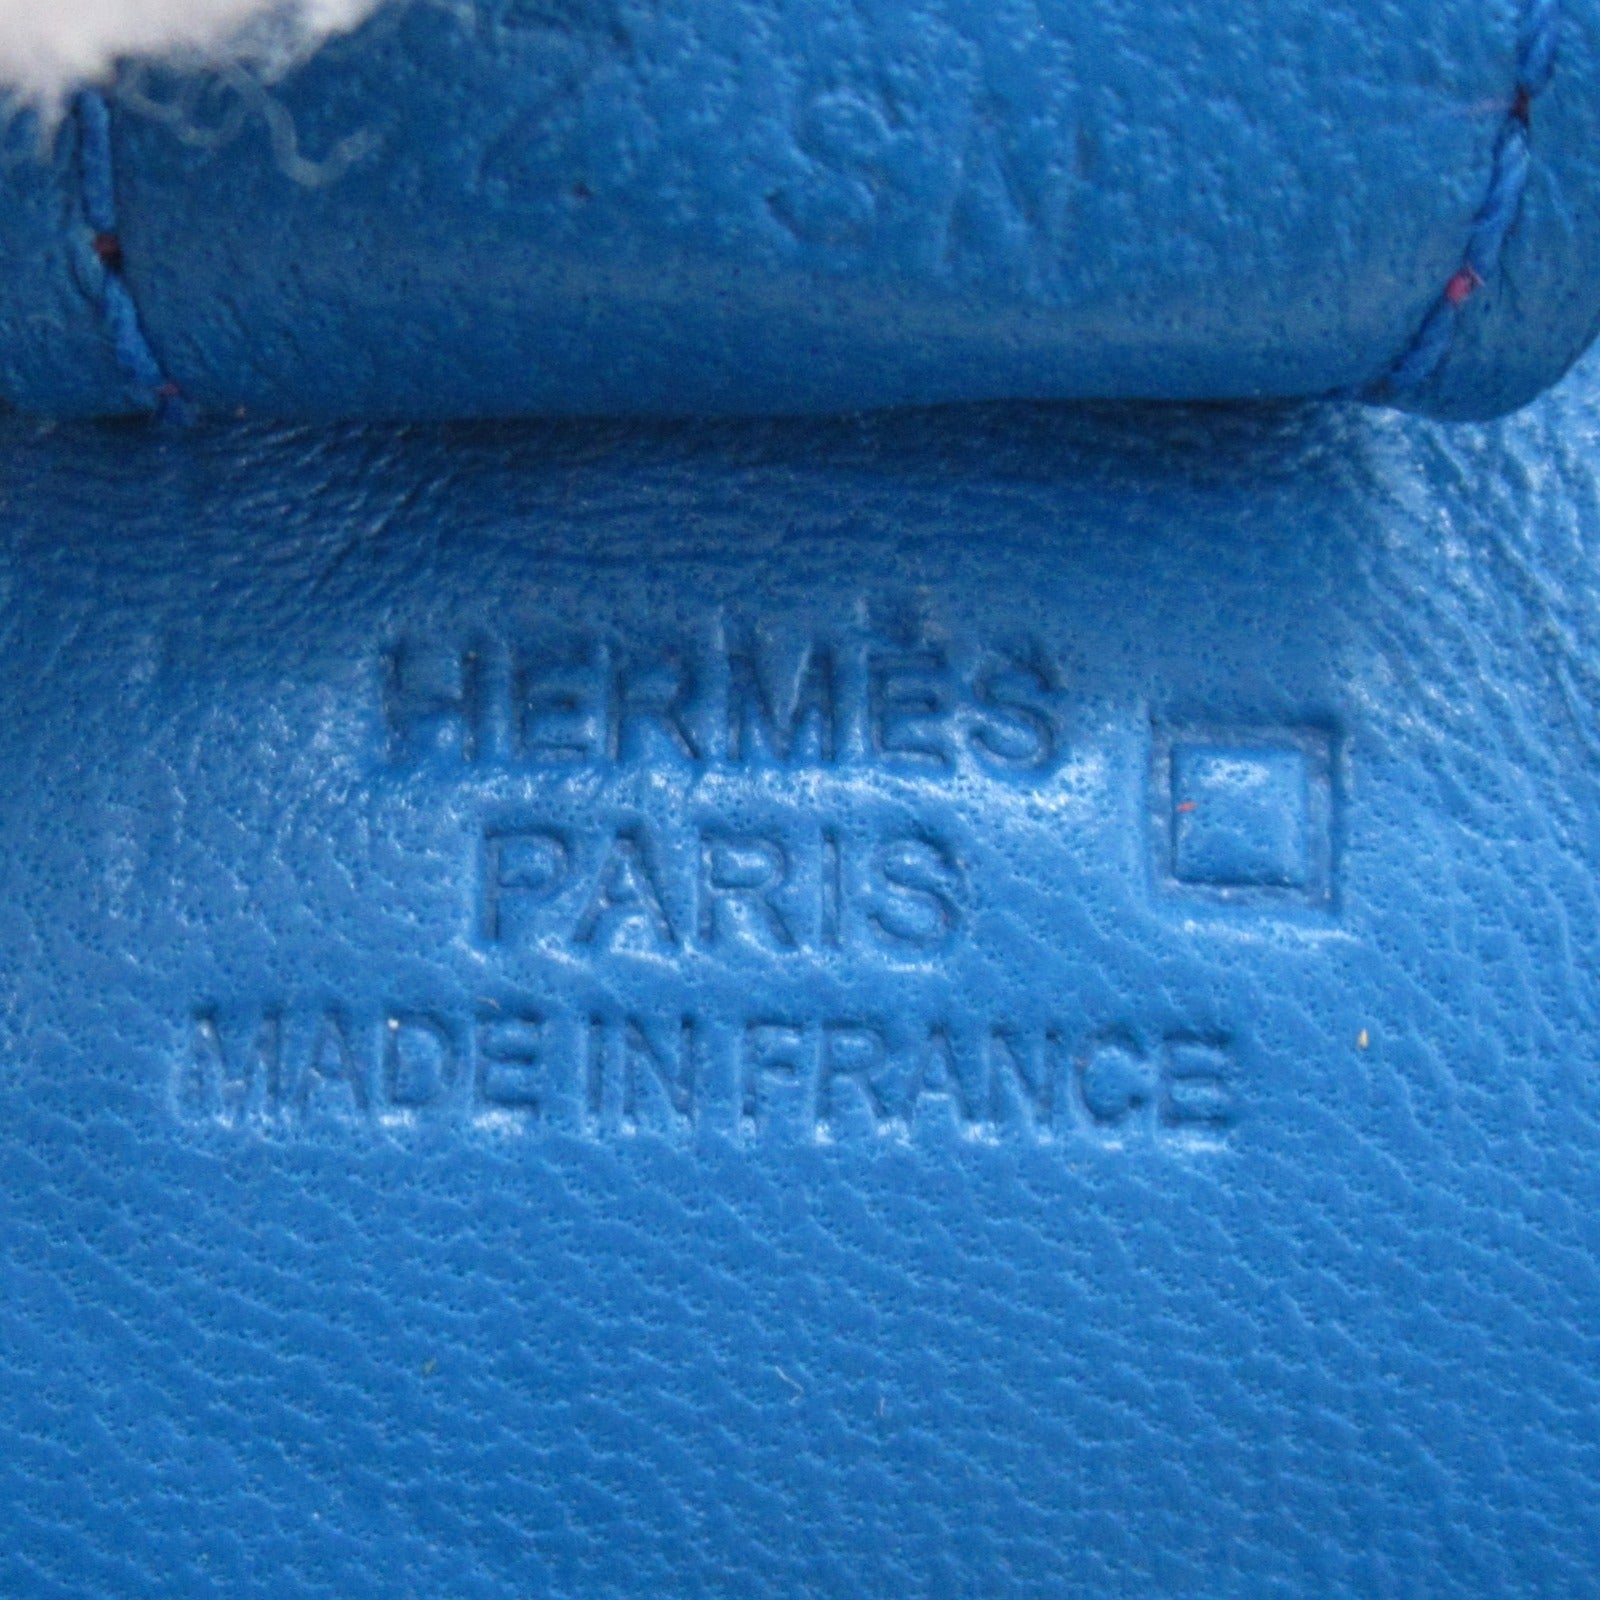 Hermes Hermes Rodeo Charm PM Bag Charm Charm Accessories Leather Alligator Animo Miro  Blue